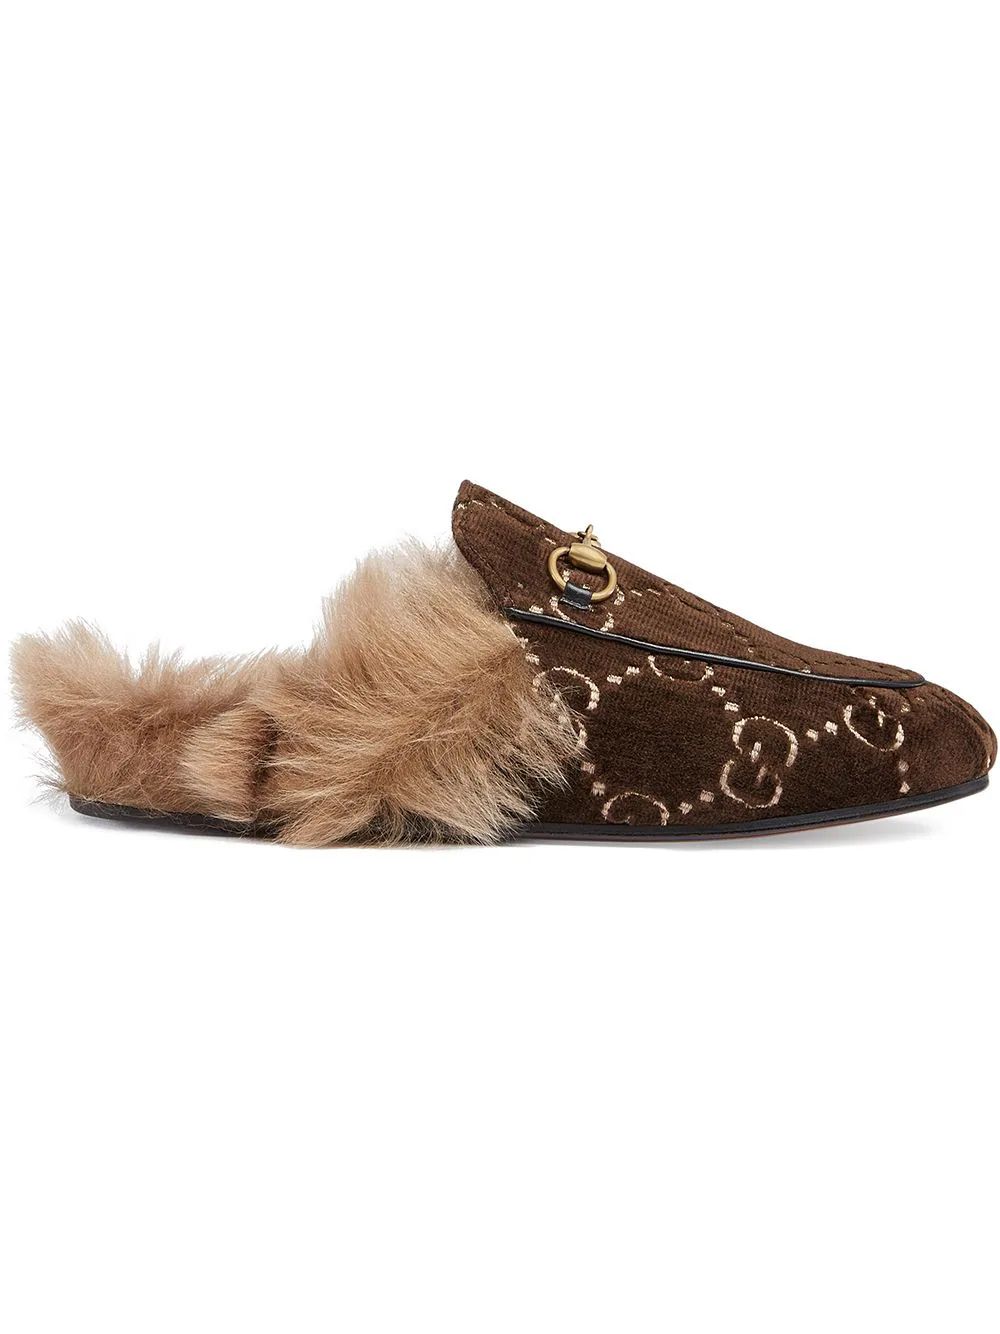 Gucci Princetown GG velvet slippers - Brown | FarFetch Global